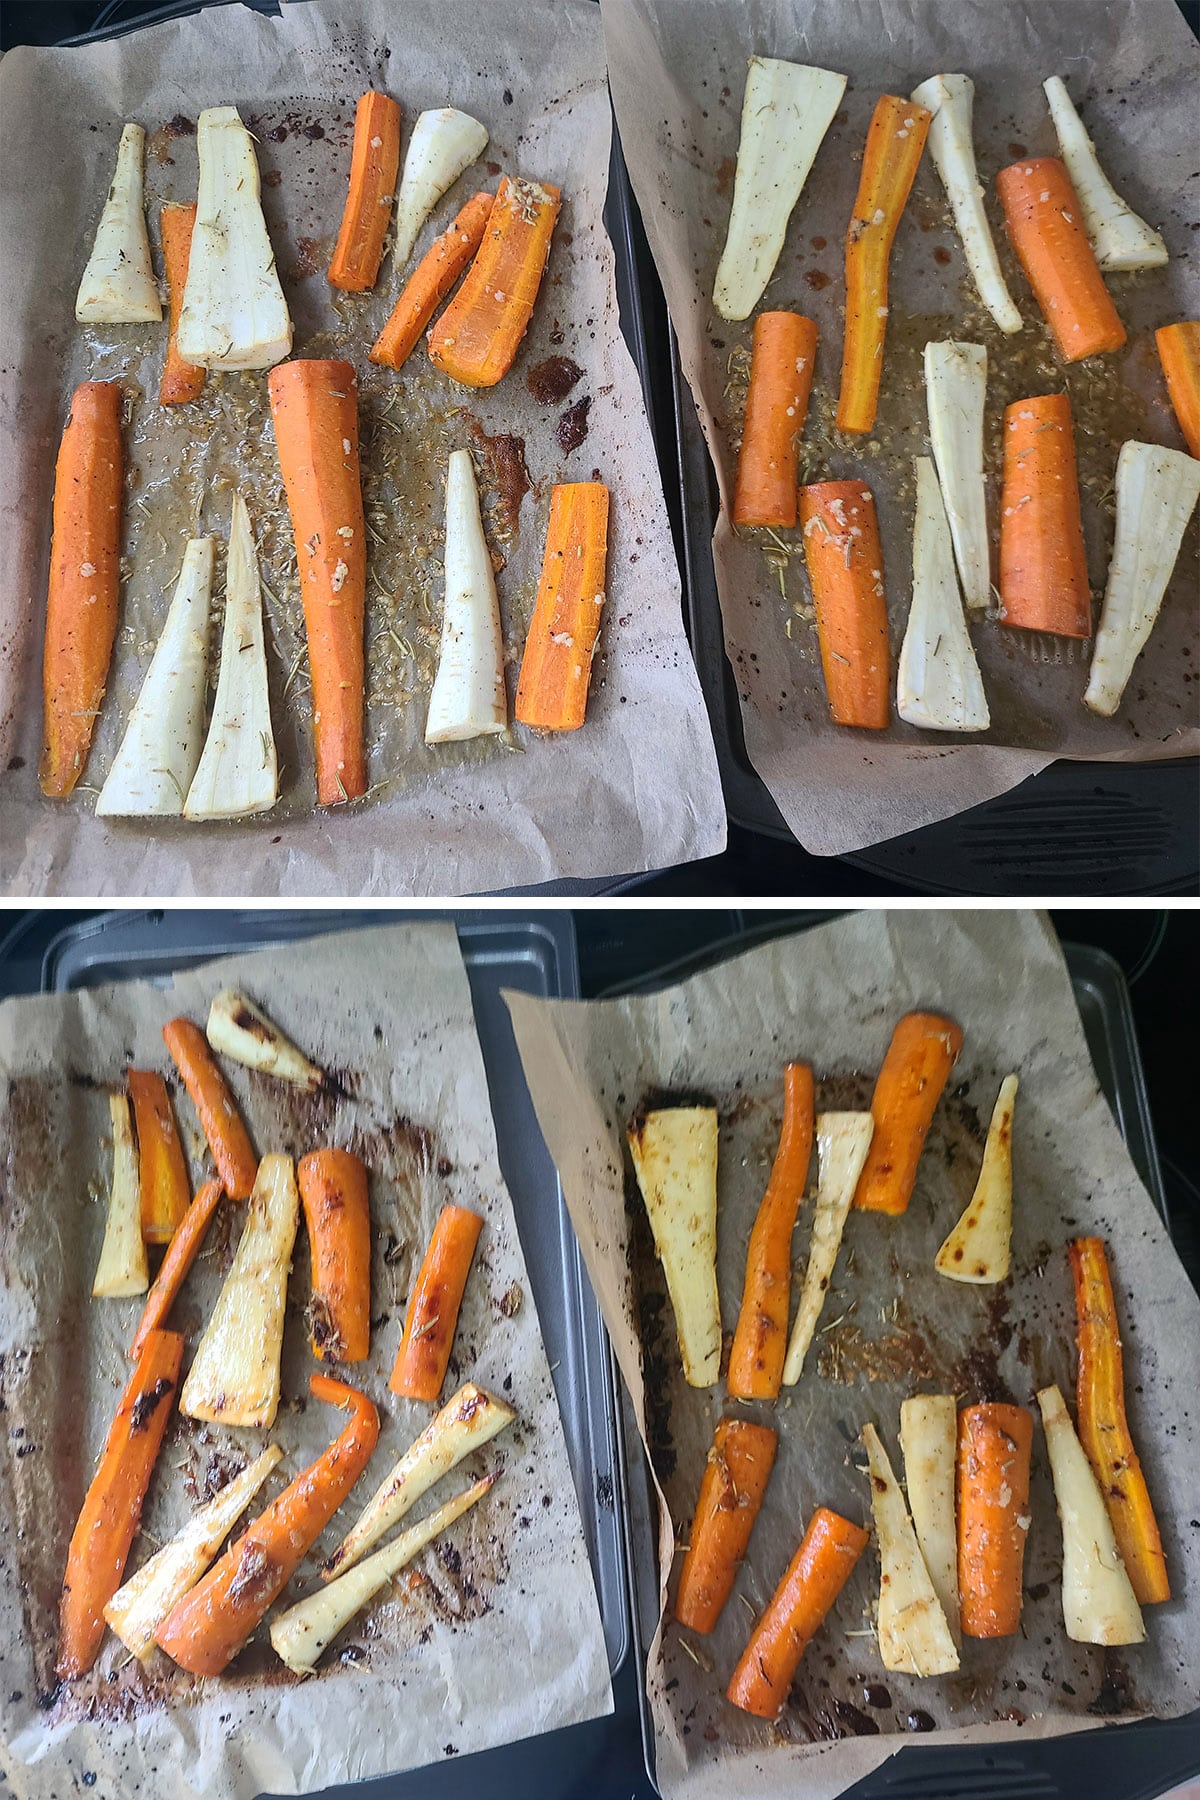 A 2 part image showing the pan of veggies at 2 different points during roasting.